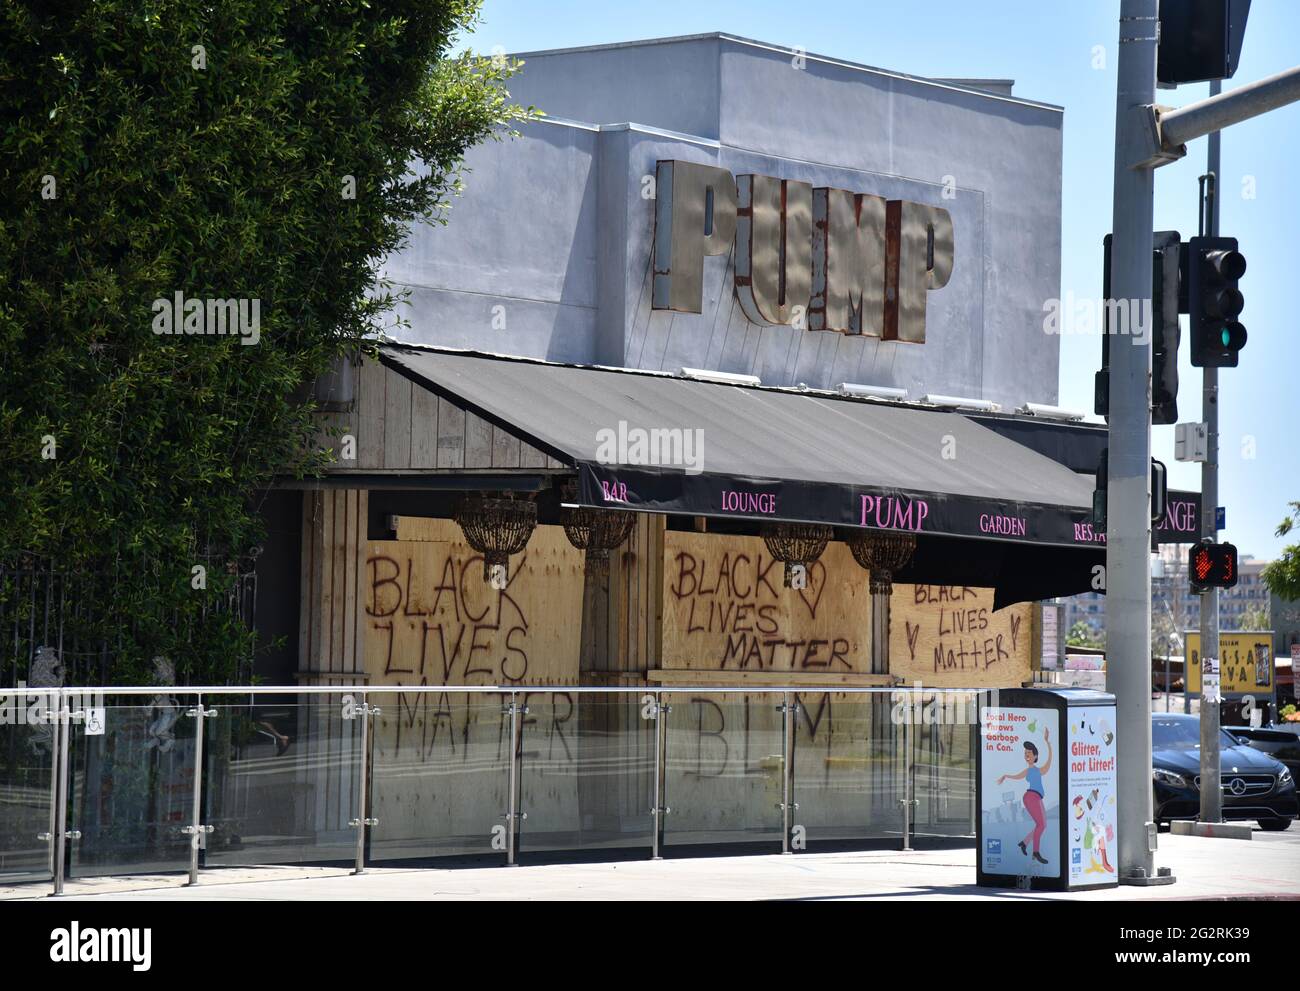 West Hollywood, CA USA - June 8, 2020: Lisa Vanderpump's restaurant and lounge, Pump, is boarded up after a series of Black Lives Matter riots Stock Photo